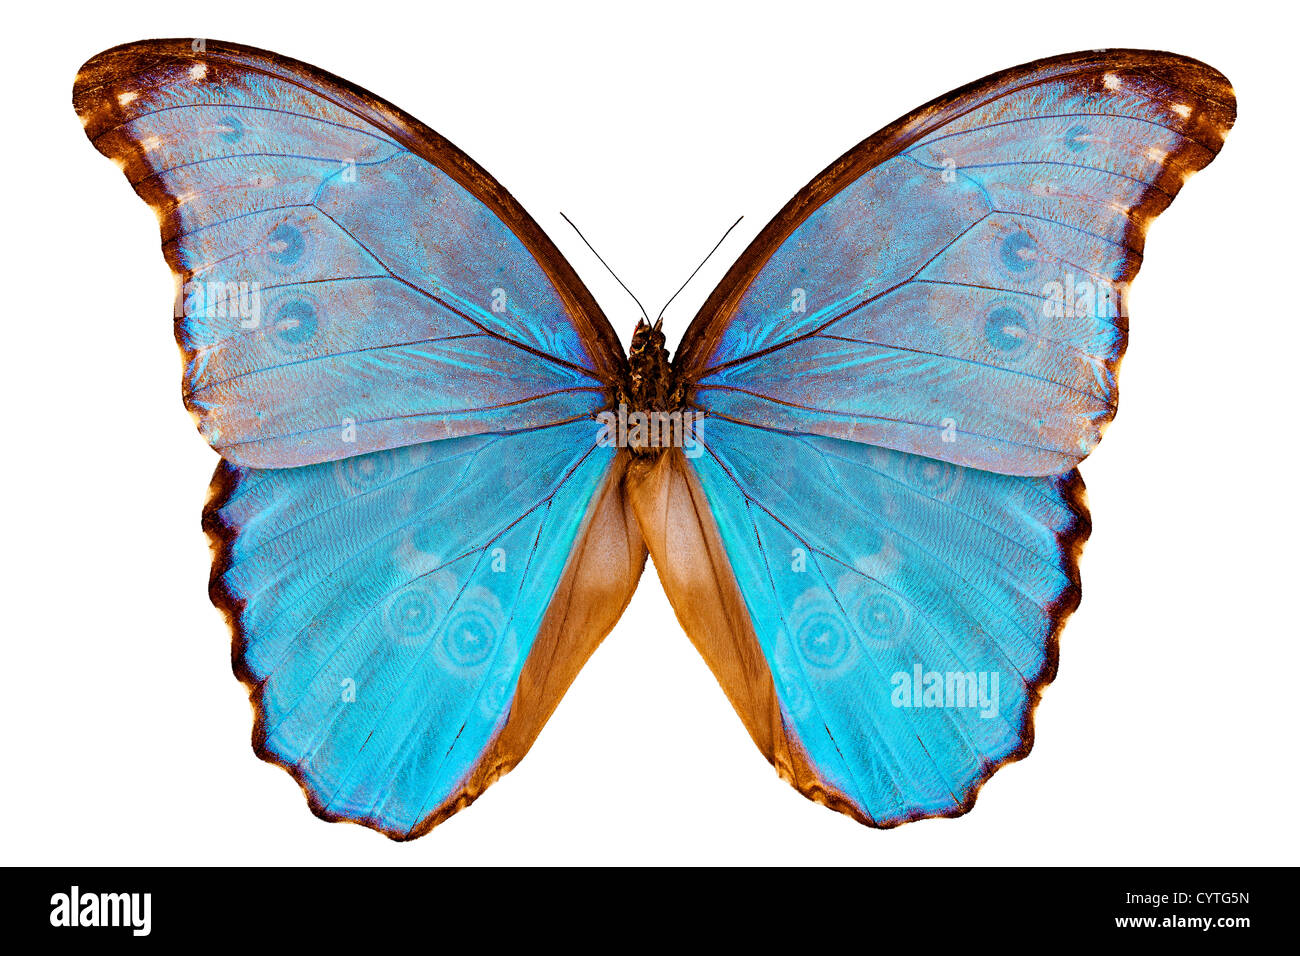 Butterfly species Morpho godarti assarpai isolated on white background Stock Photo